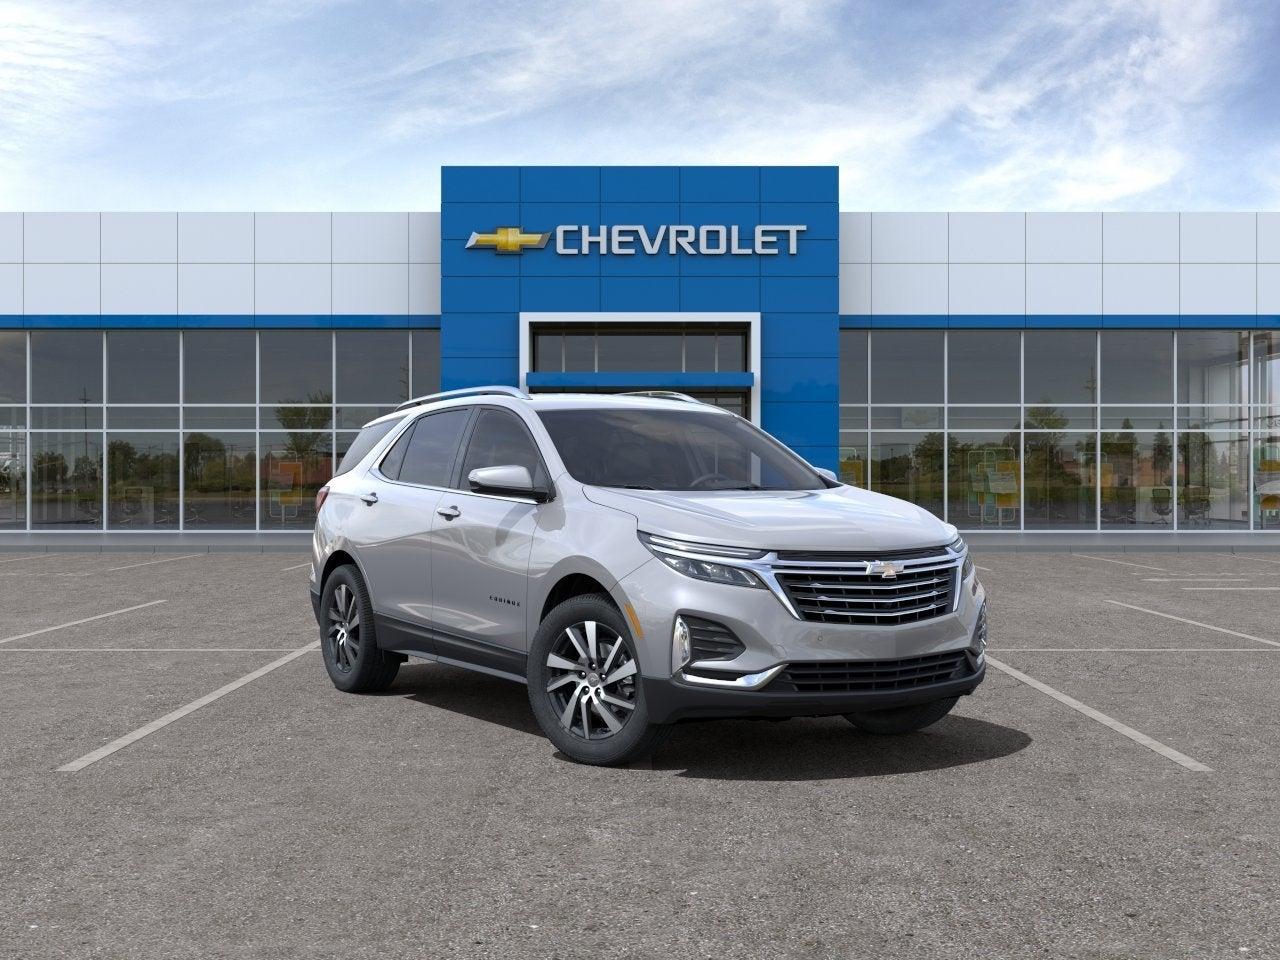 2023 Chevrolet Equinox Photo in Wooster, OH 44691